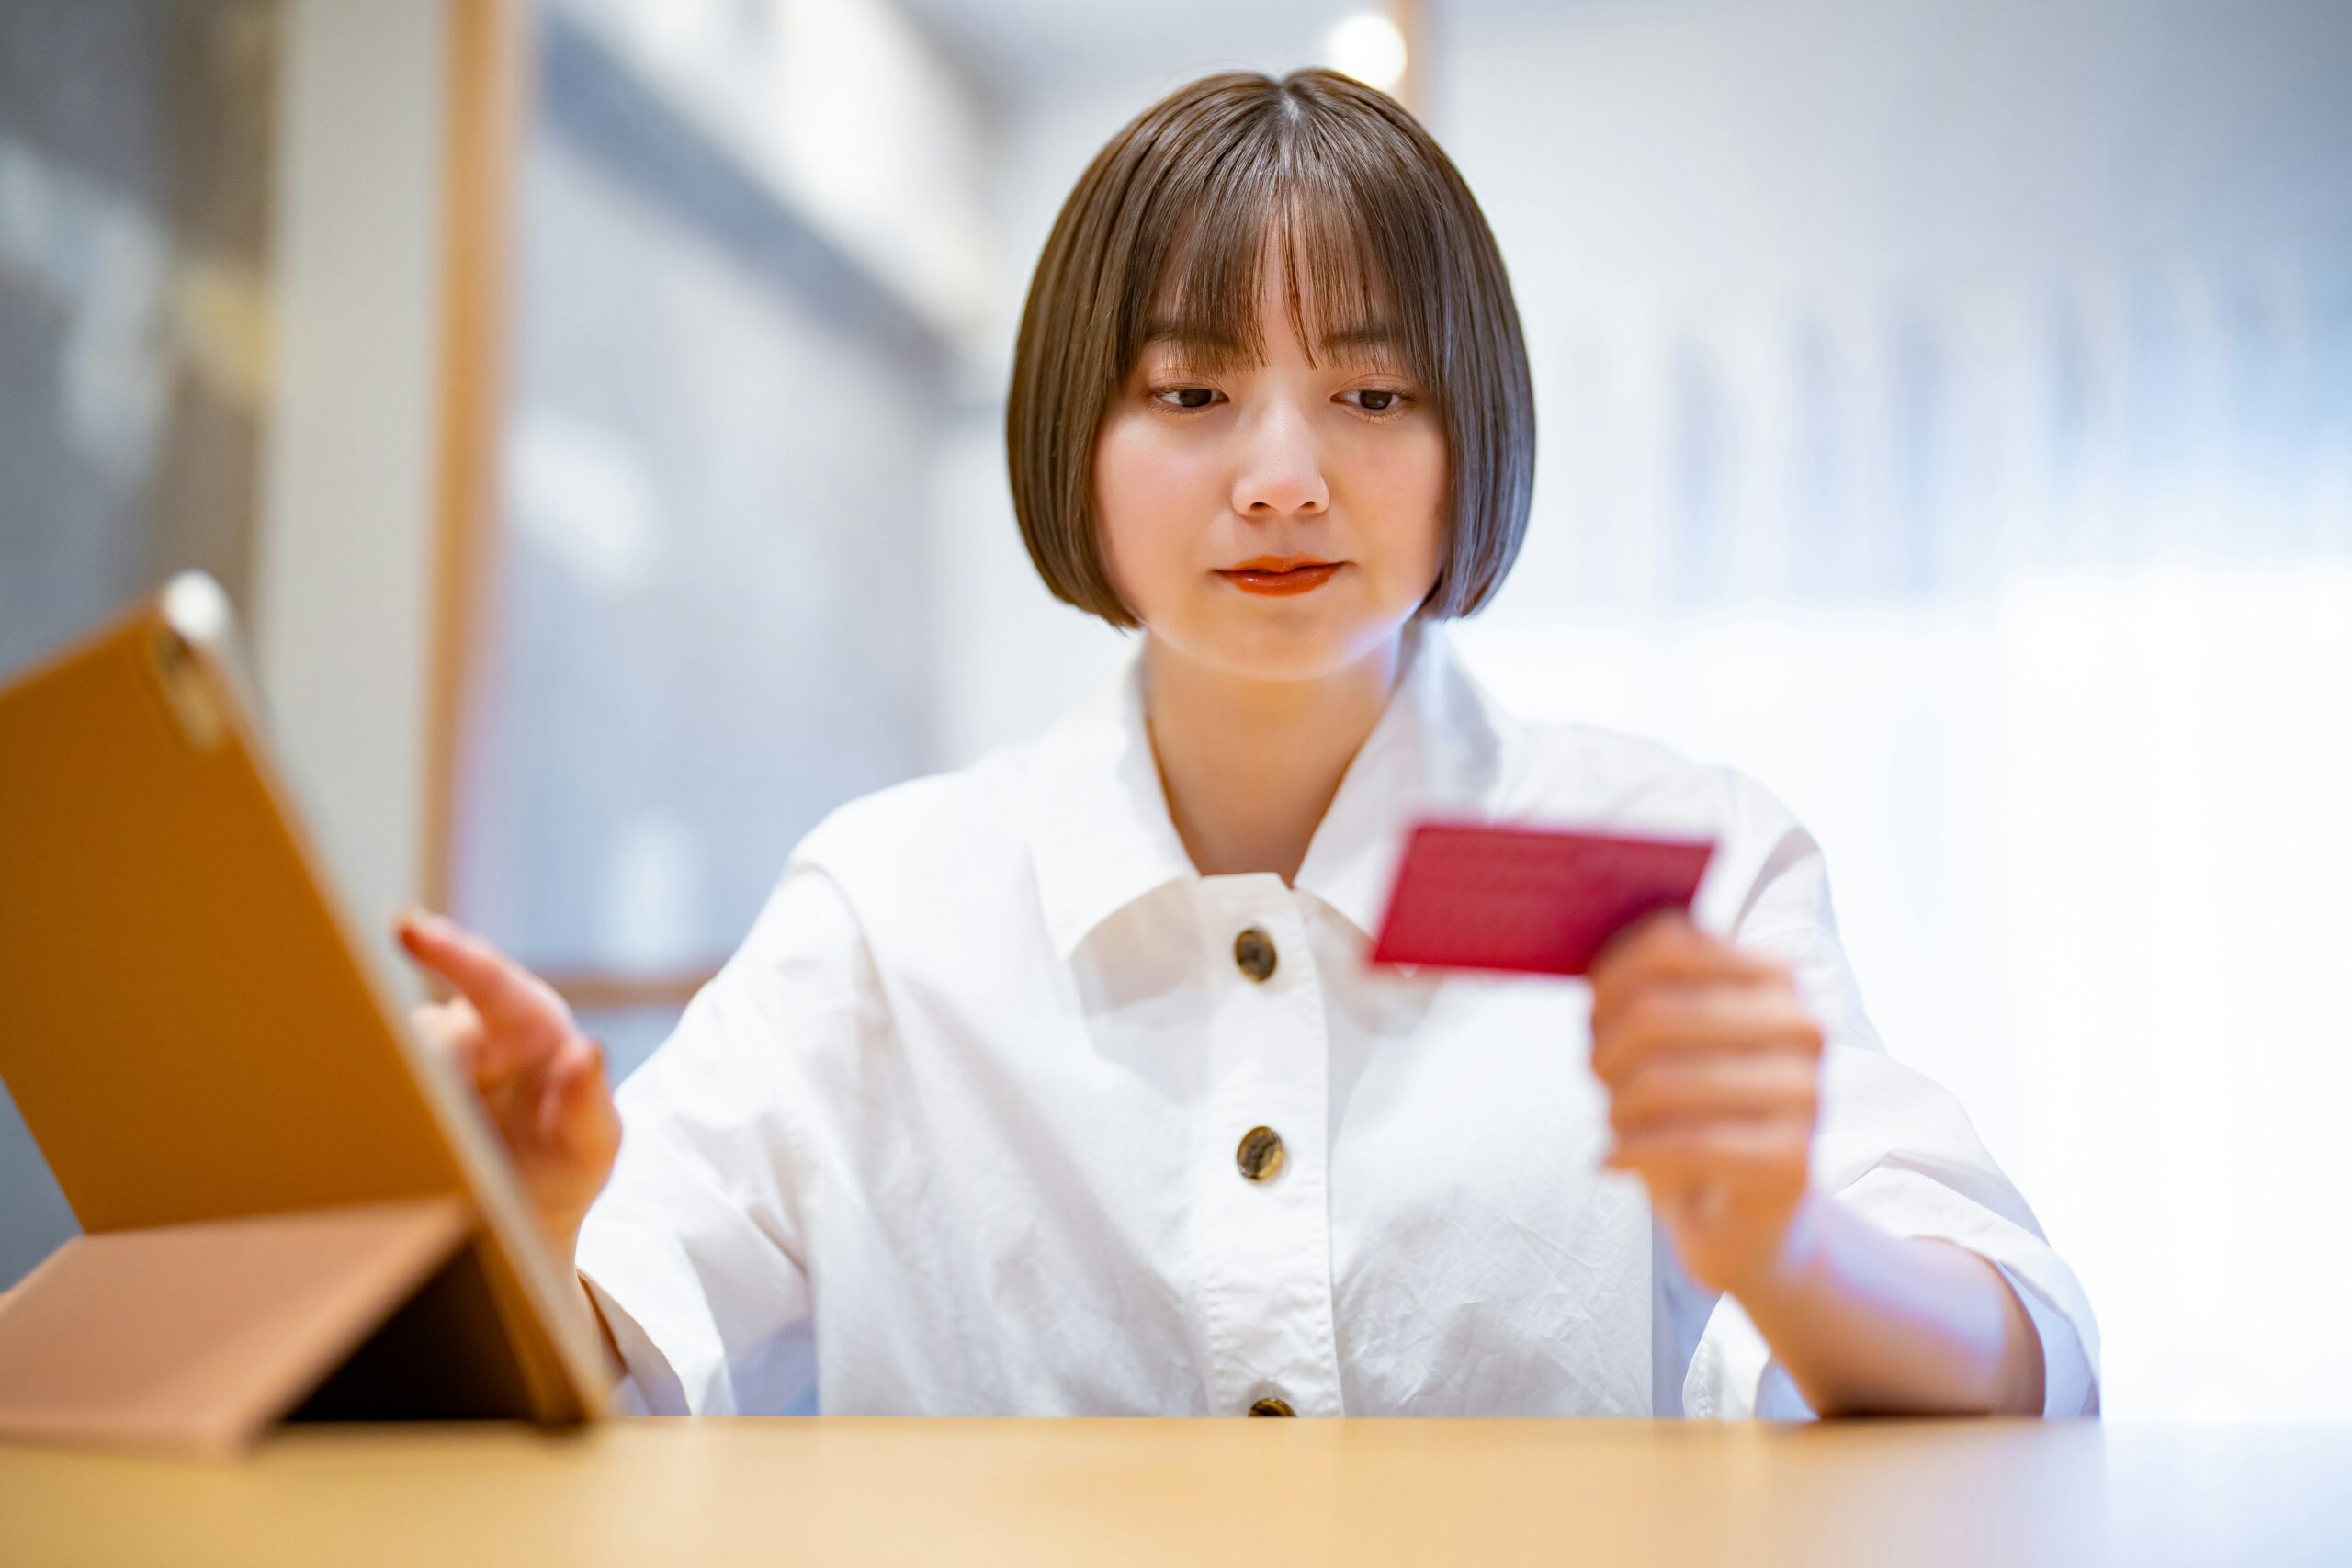 A young woman holding a credit card in front of a laptop, learning how to protect personal information online while entering in information.